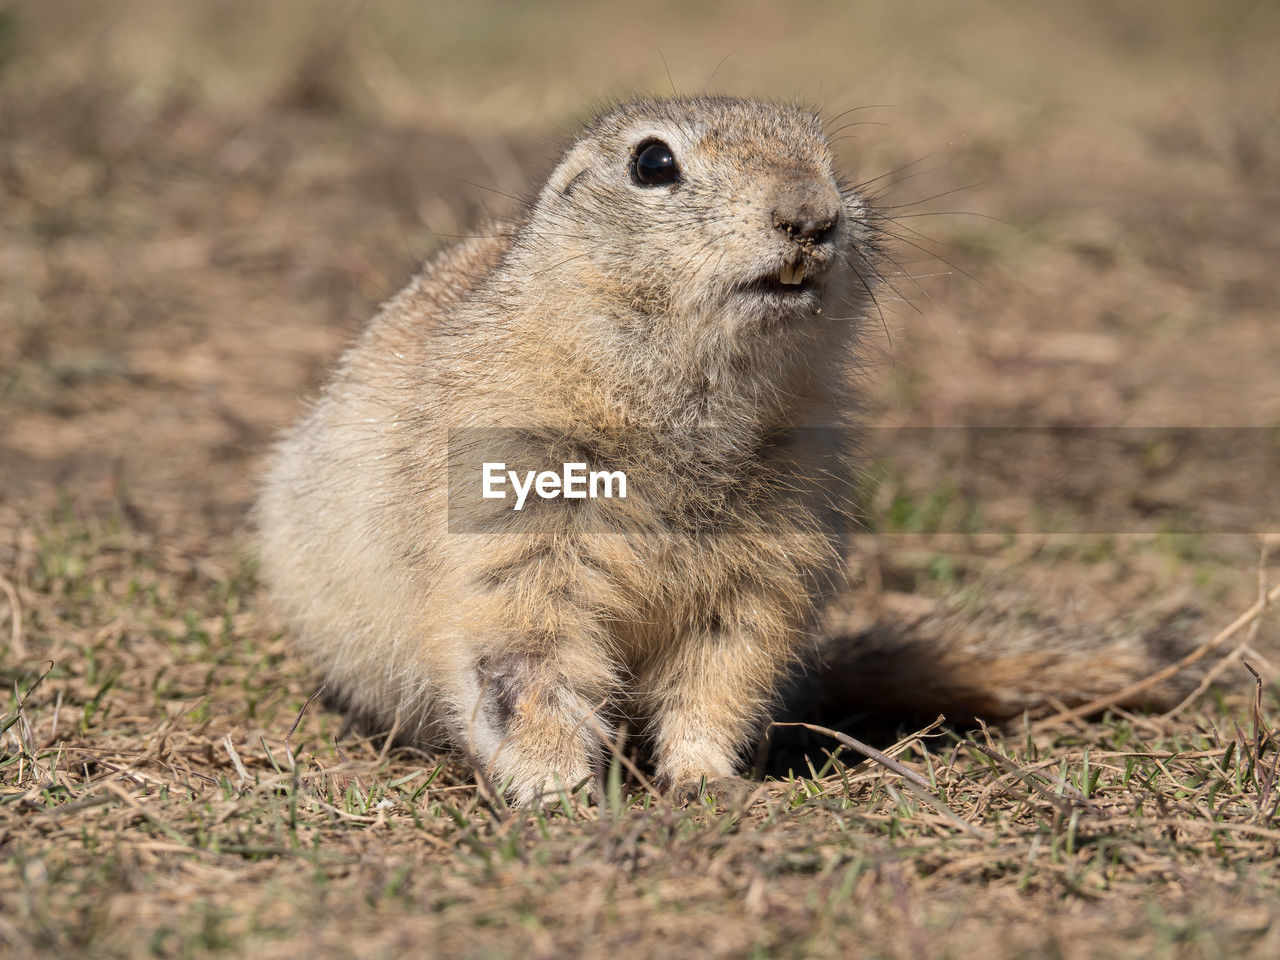 animal, animal themes, animal wildlife, prairie dog, one animal, wildlife, mammal, whiskers, squirrel, no people, nature, portrait, rodent, outdoors, grass, cute, full length, day, looking at camera, close-up, selective focus